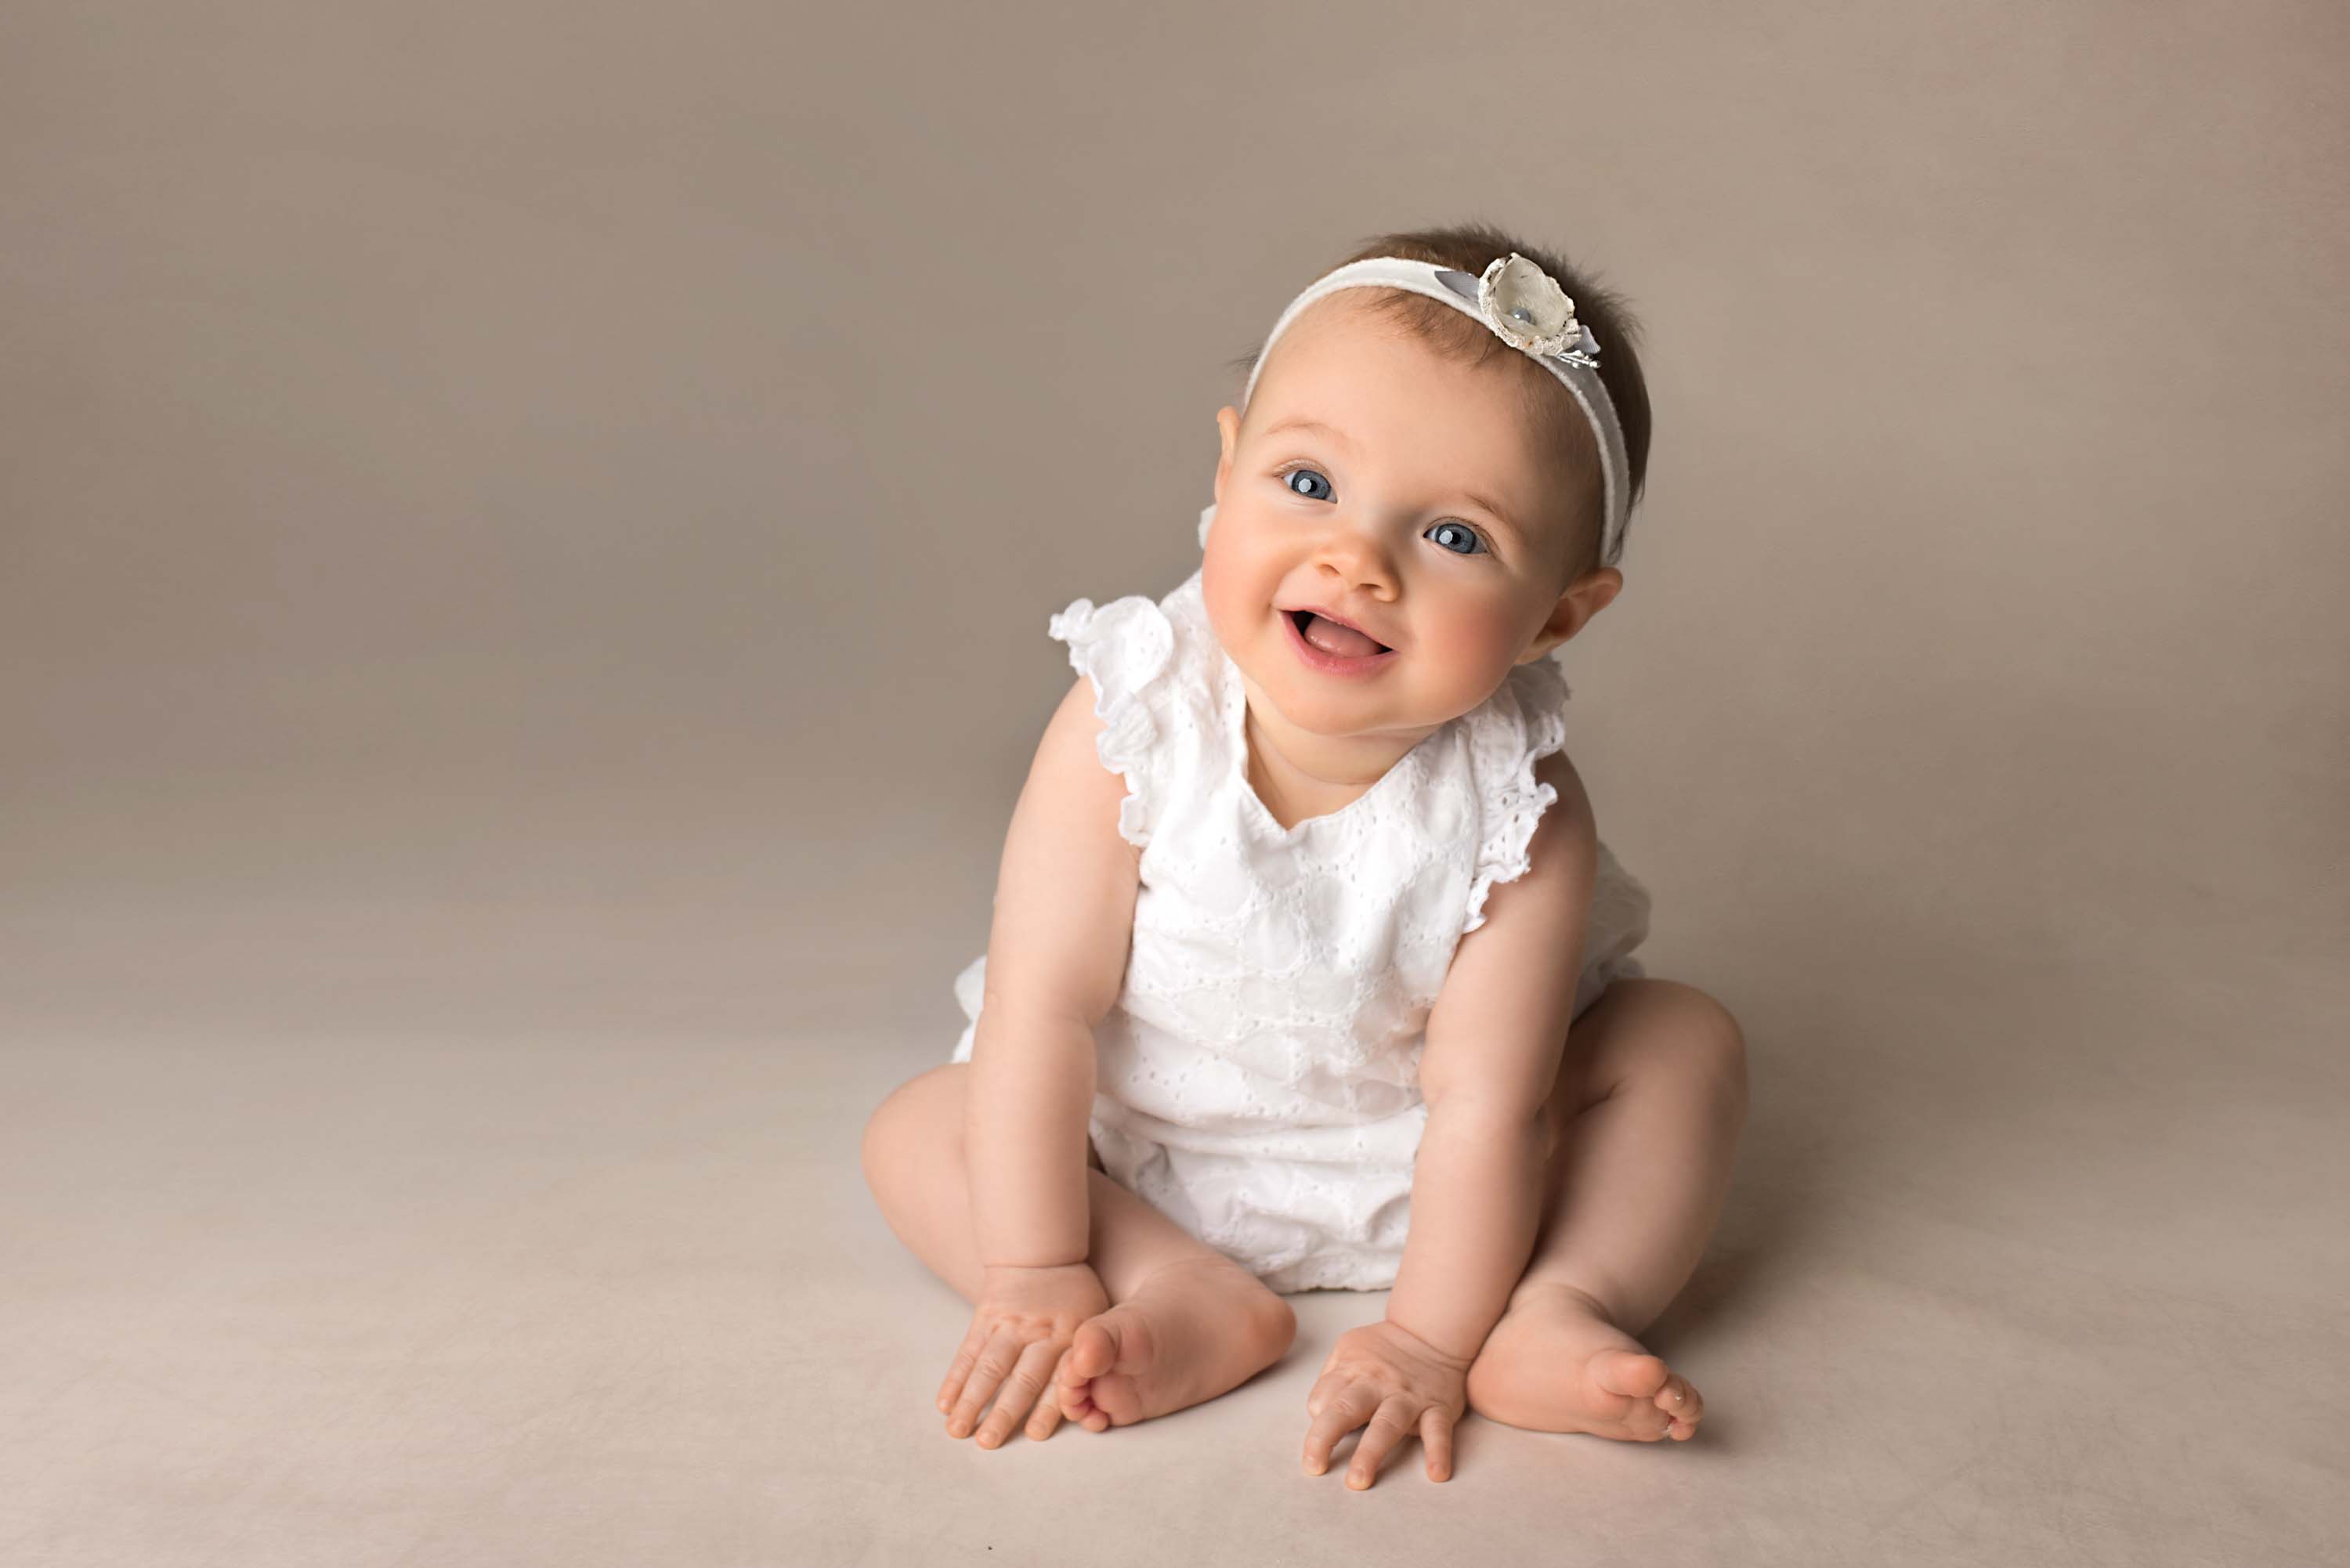 Young girl sitting on floor wearing white romper and headband